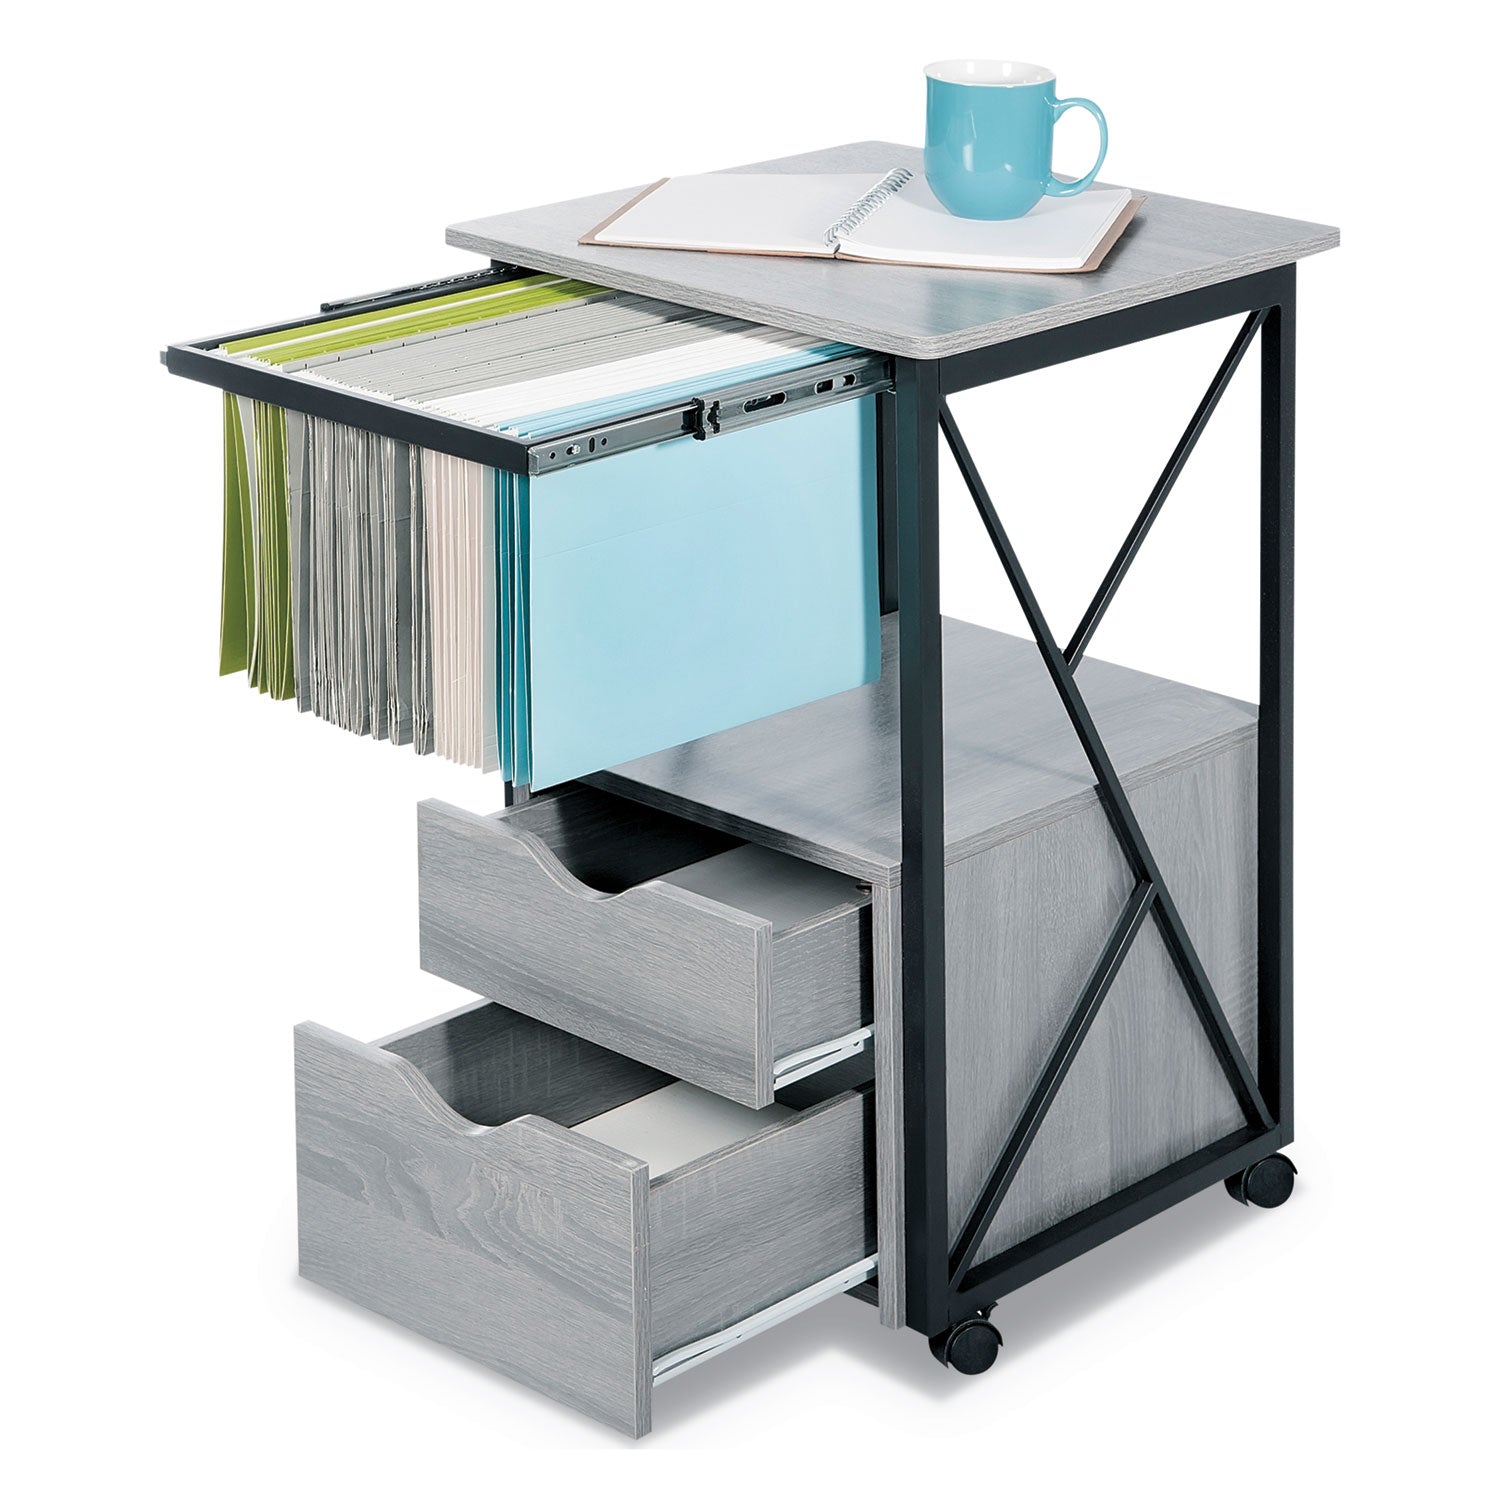 mood-storage-pedestals-with-open-format-hanging-file-rack-left-or-right-2-drawers-box-file-gray-1775-x-1775-x-30_saf1906gr - 2